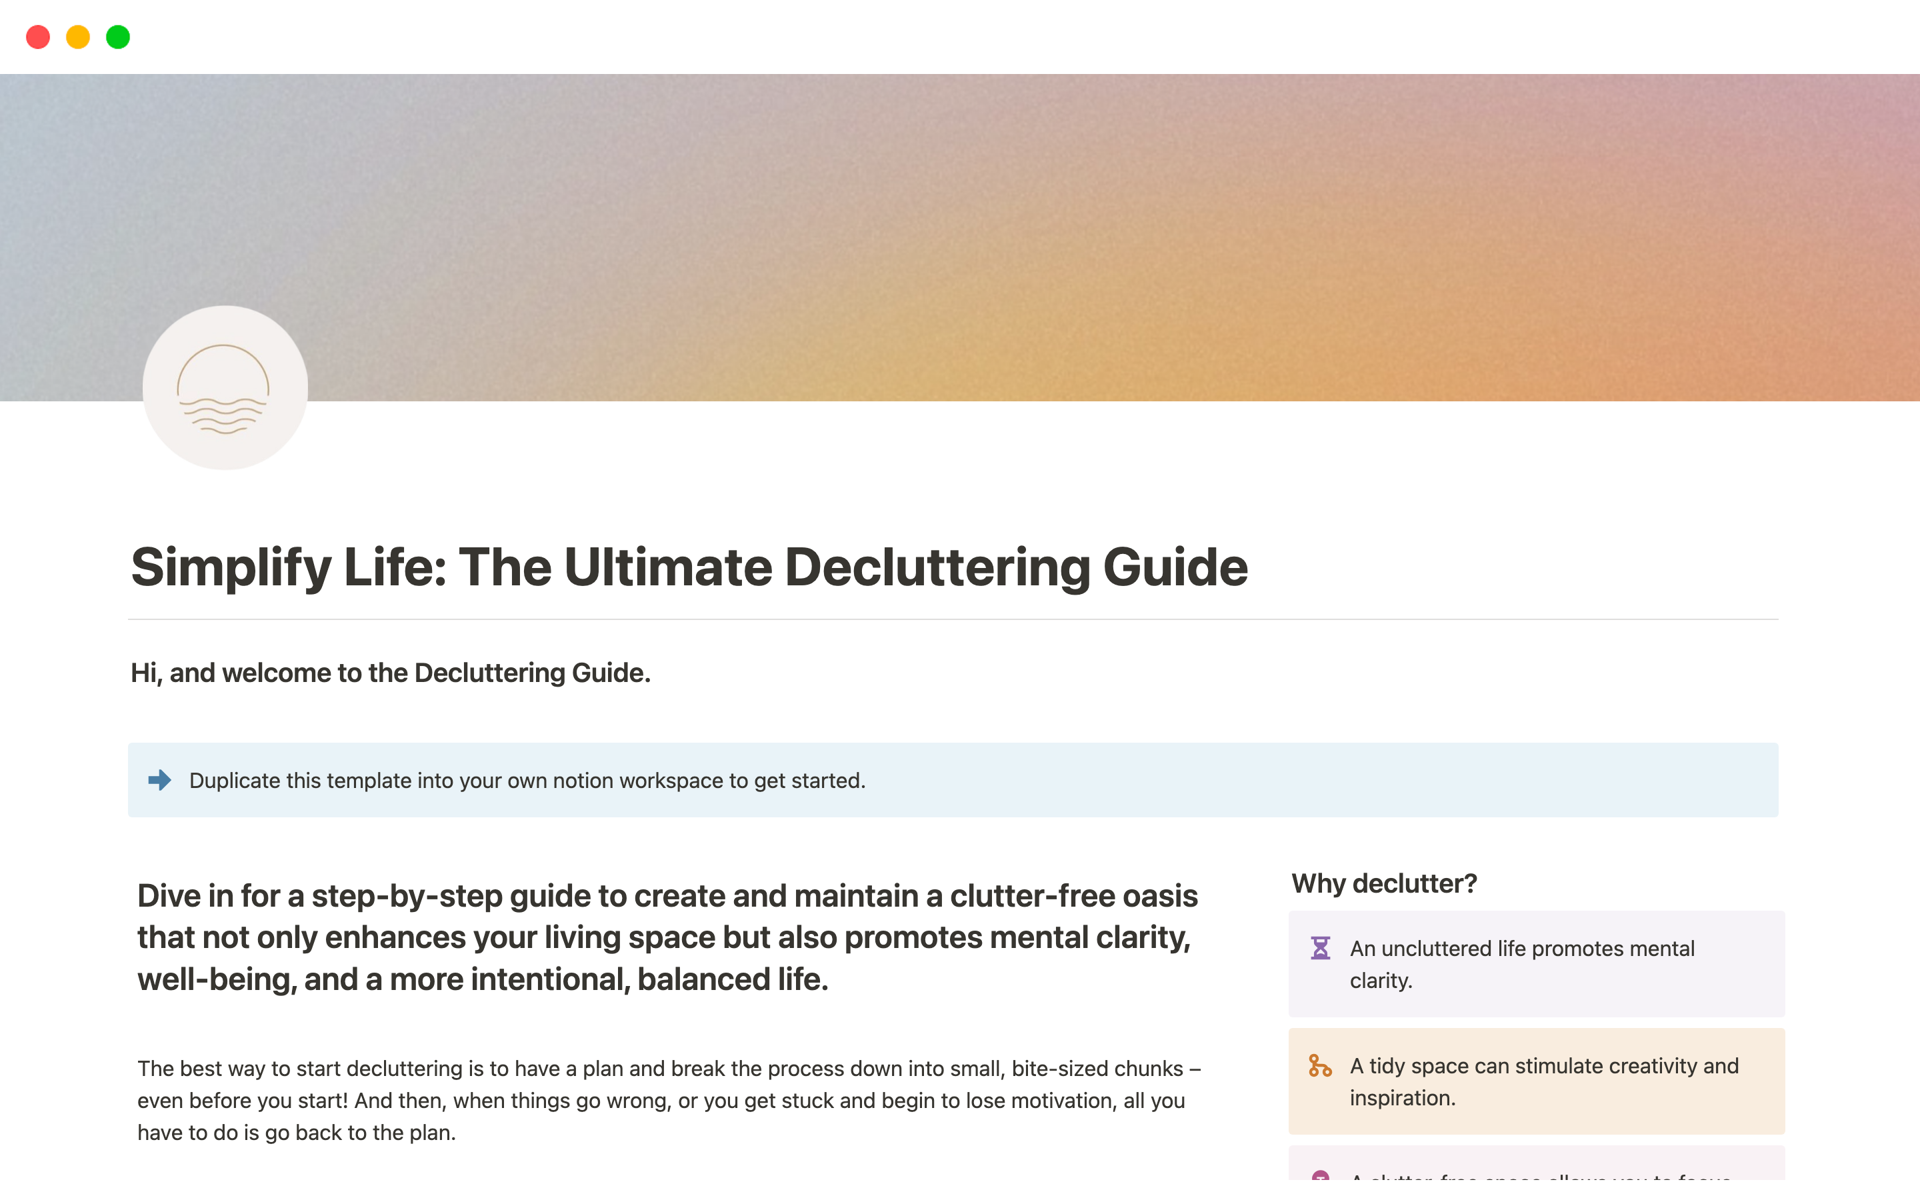 Simplify Life: The Ultimate Decluttering Guideのテンプレートのプレビュー